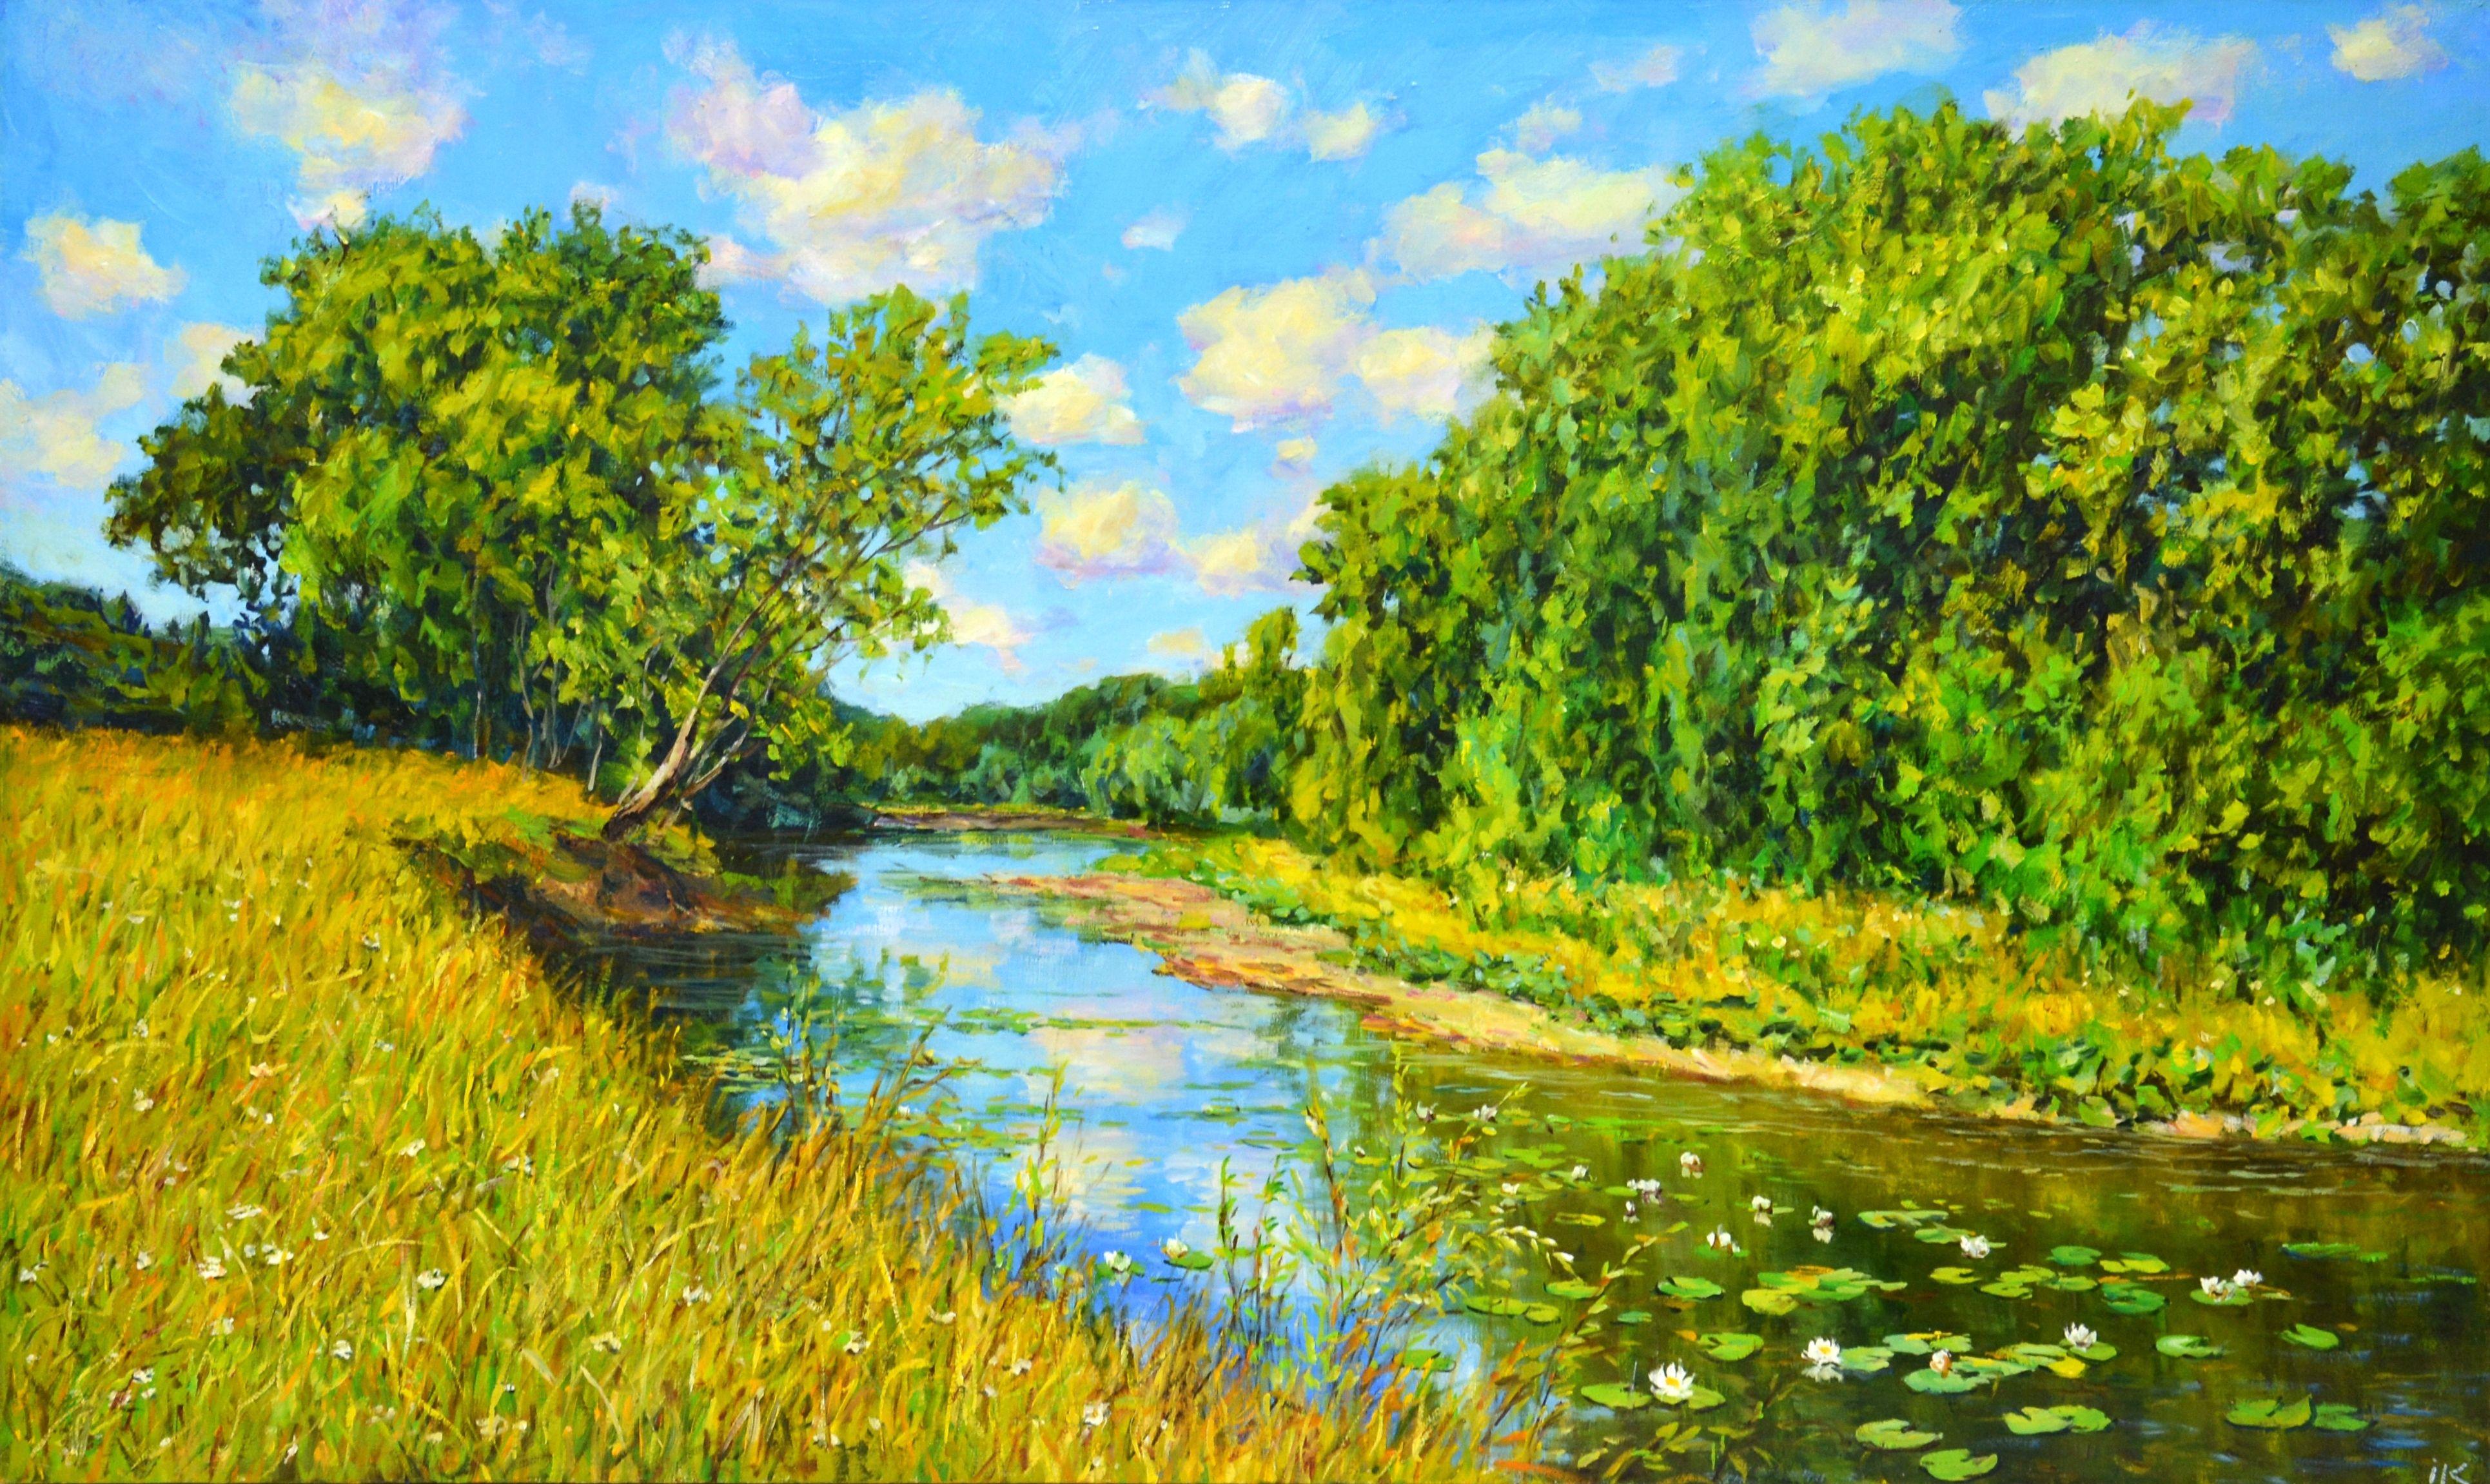 Painting Mid-August. Nature is an inexhaustible source of inspiration. A saturated palette of greenery, a quiet river, water, a blue sky with clouds, water lilies on the water, the reflection of the sky in the water cause a feeling of love and